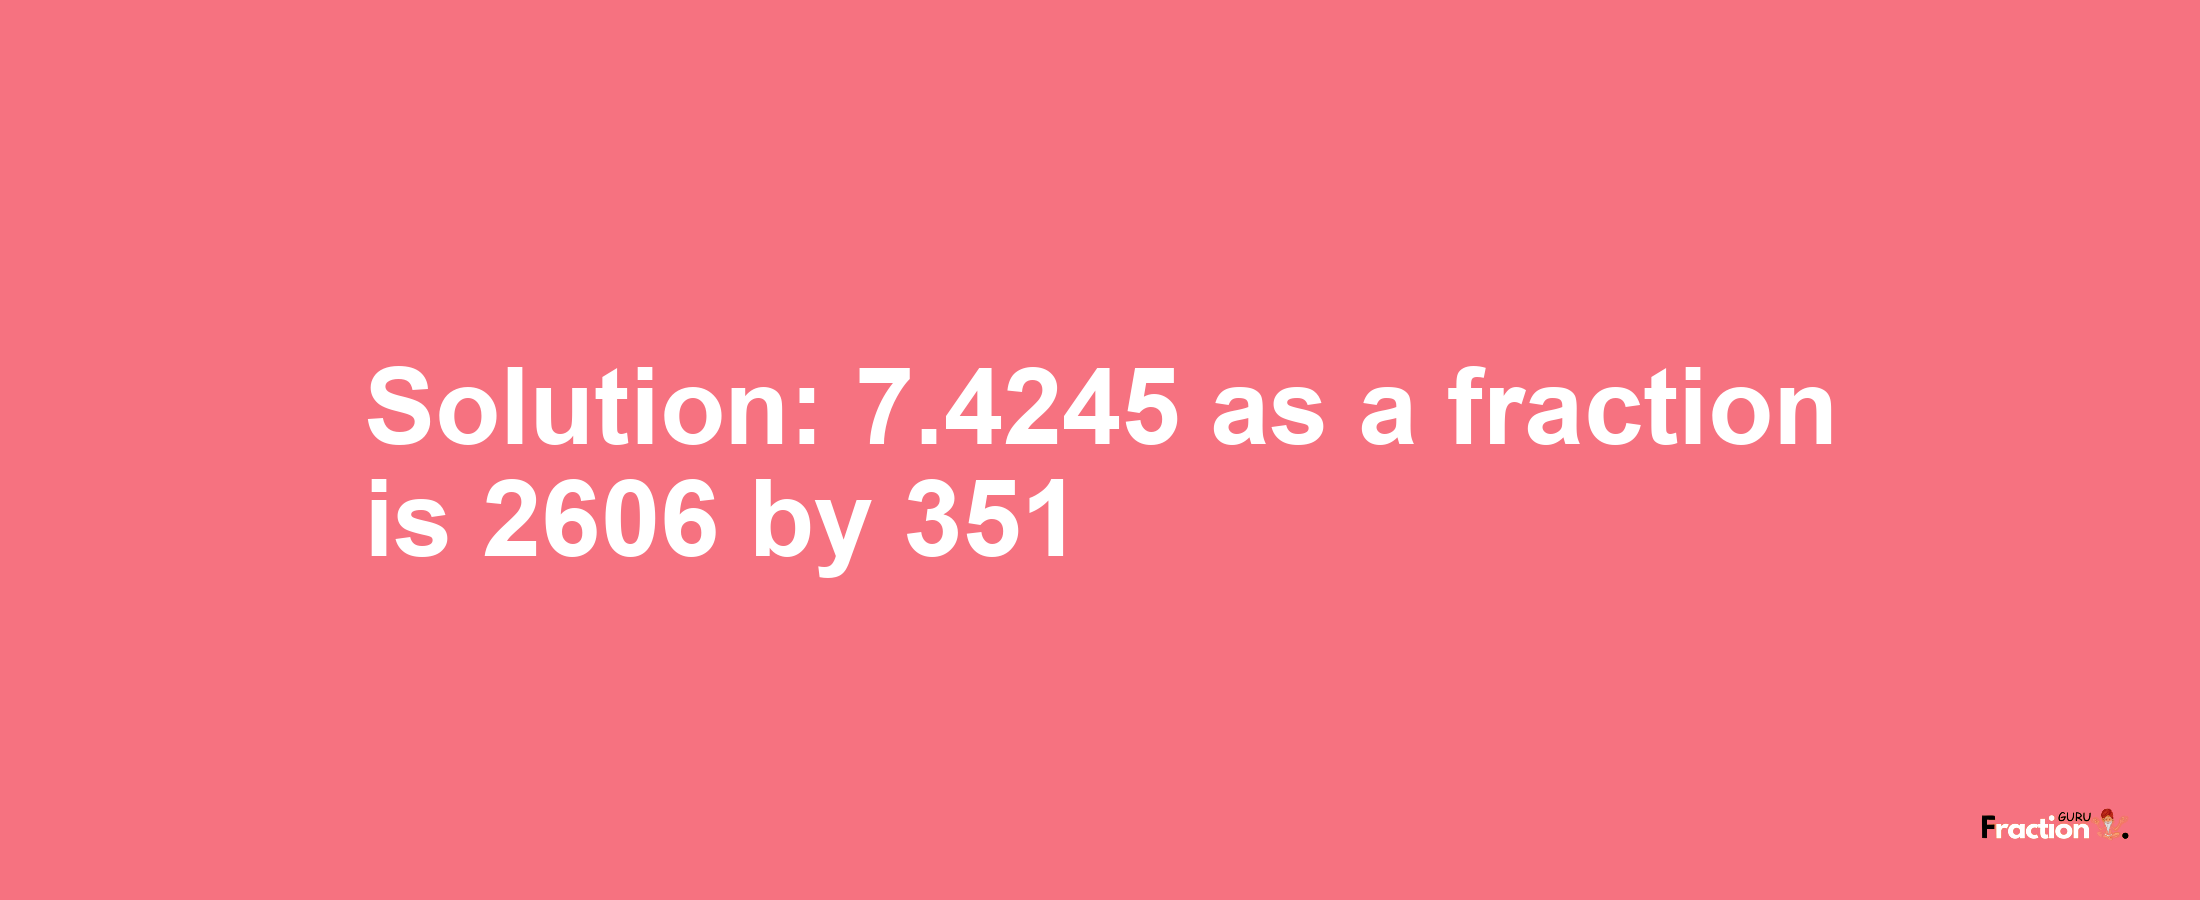 Solution:7.4245 as a fraction is 2606/351